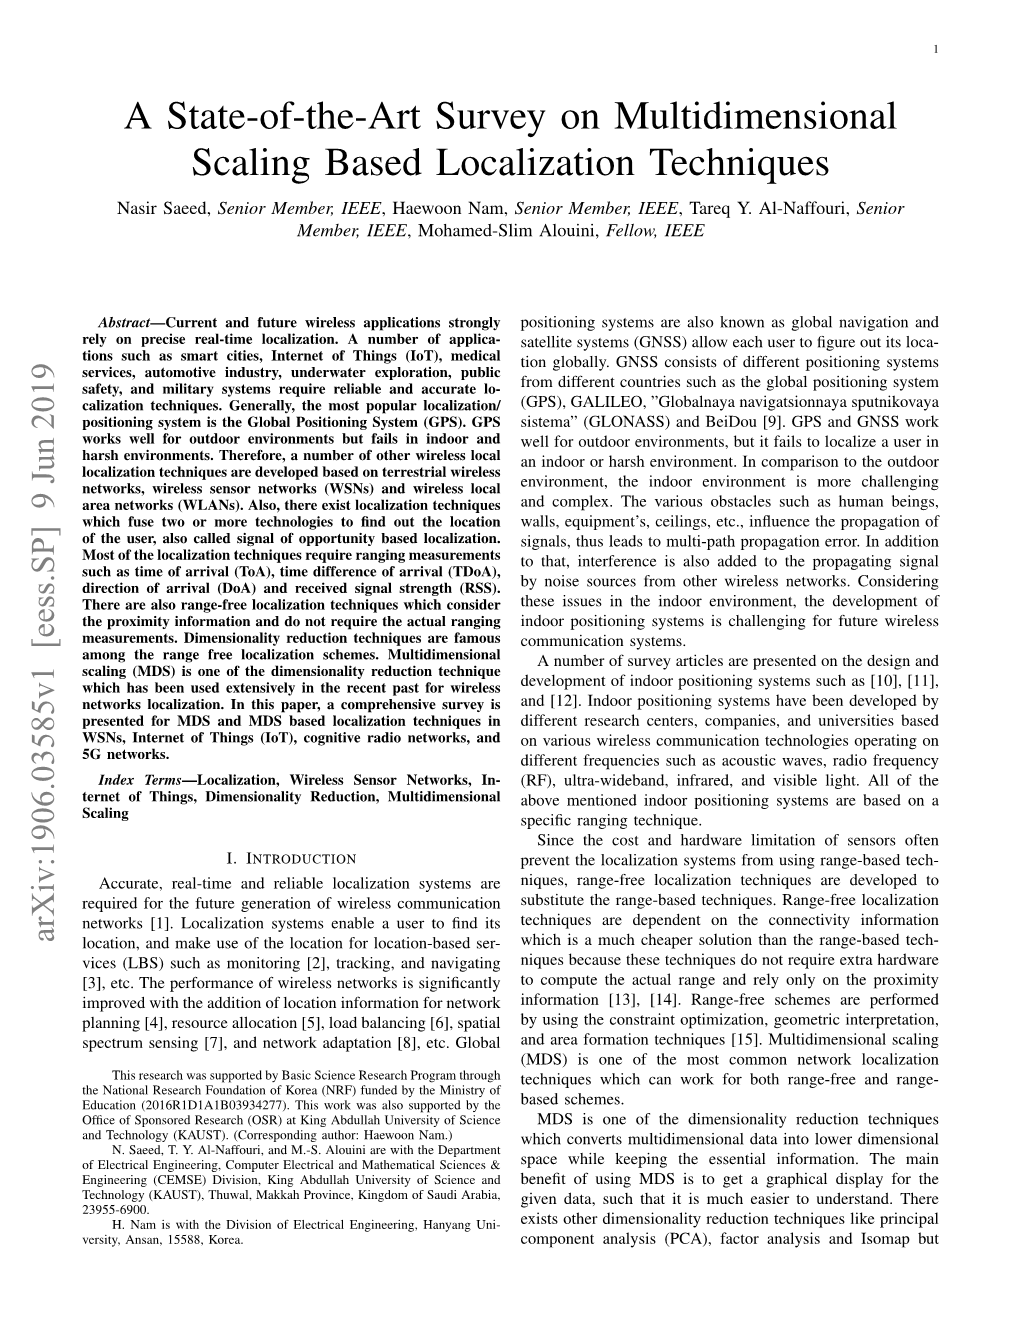 A State-Of-The-Art Survey on Multidimensional Scaling Based Localization Techniques Nasir Saeed, Senior Member, IEEE, Haewoon Nam, Senior Member, IEEE, Tareq Y